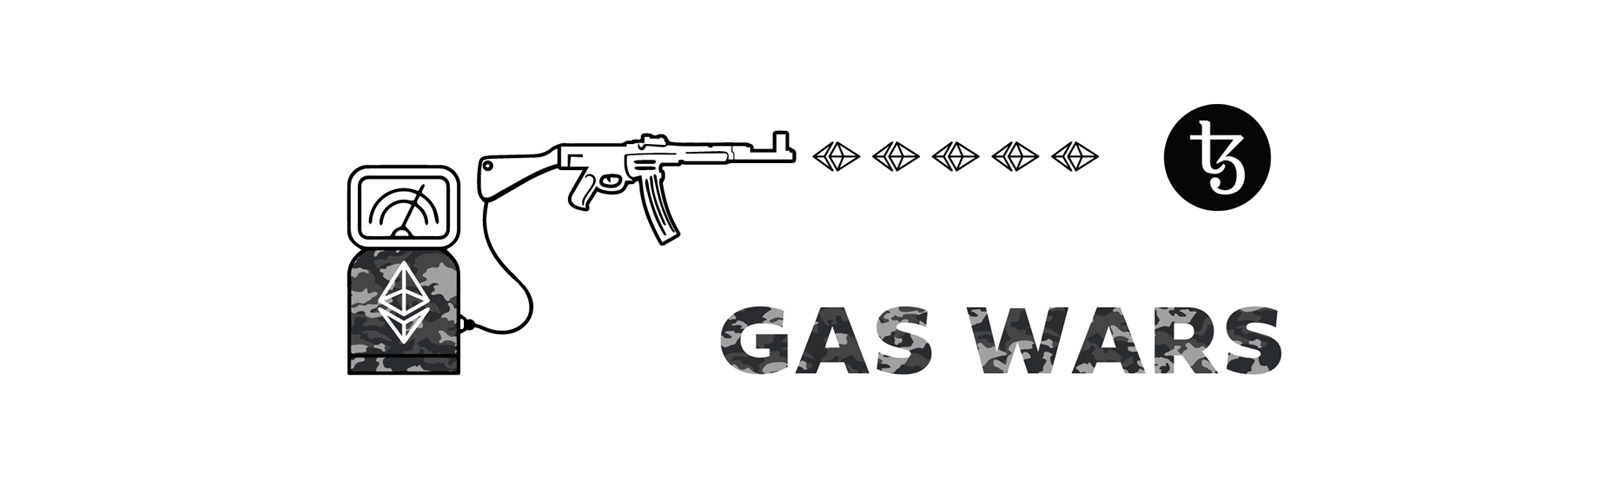 Gas wars crypto betting shops for sale in london